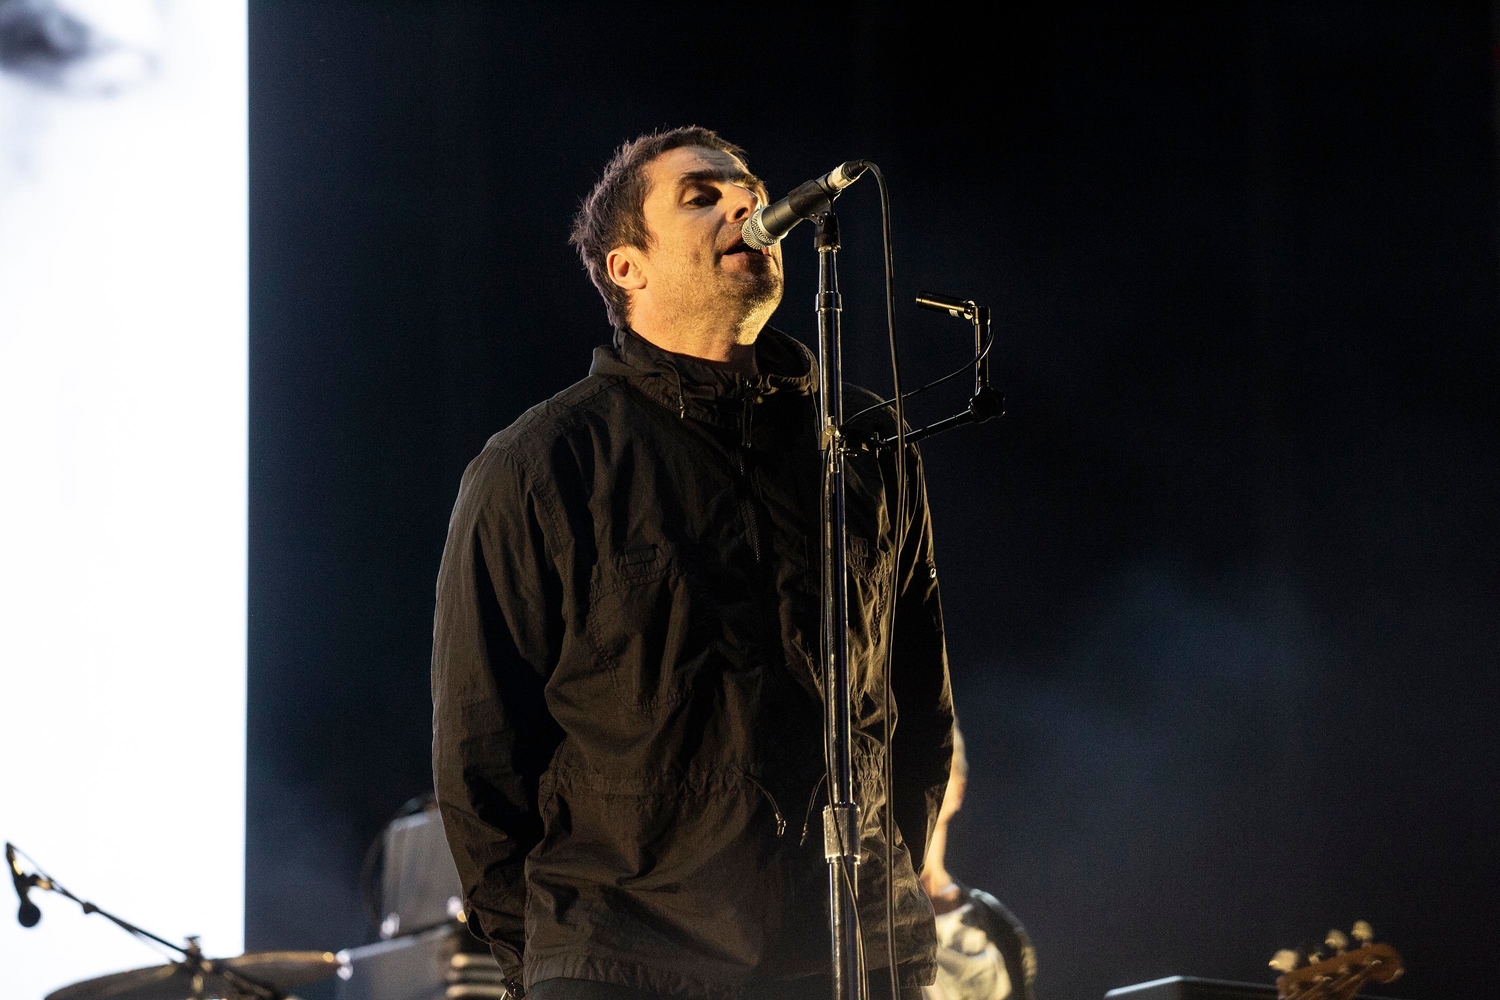 Liam Gallagher to play this year’s Eden Sessions